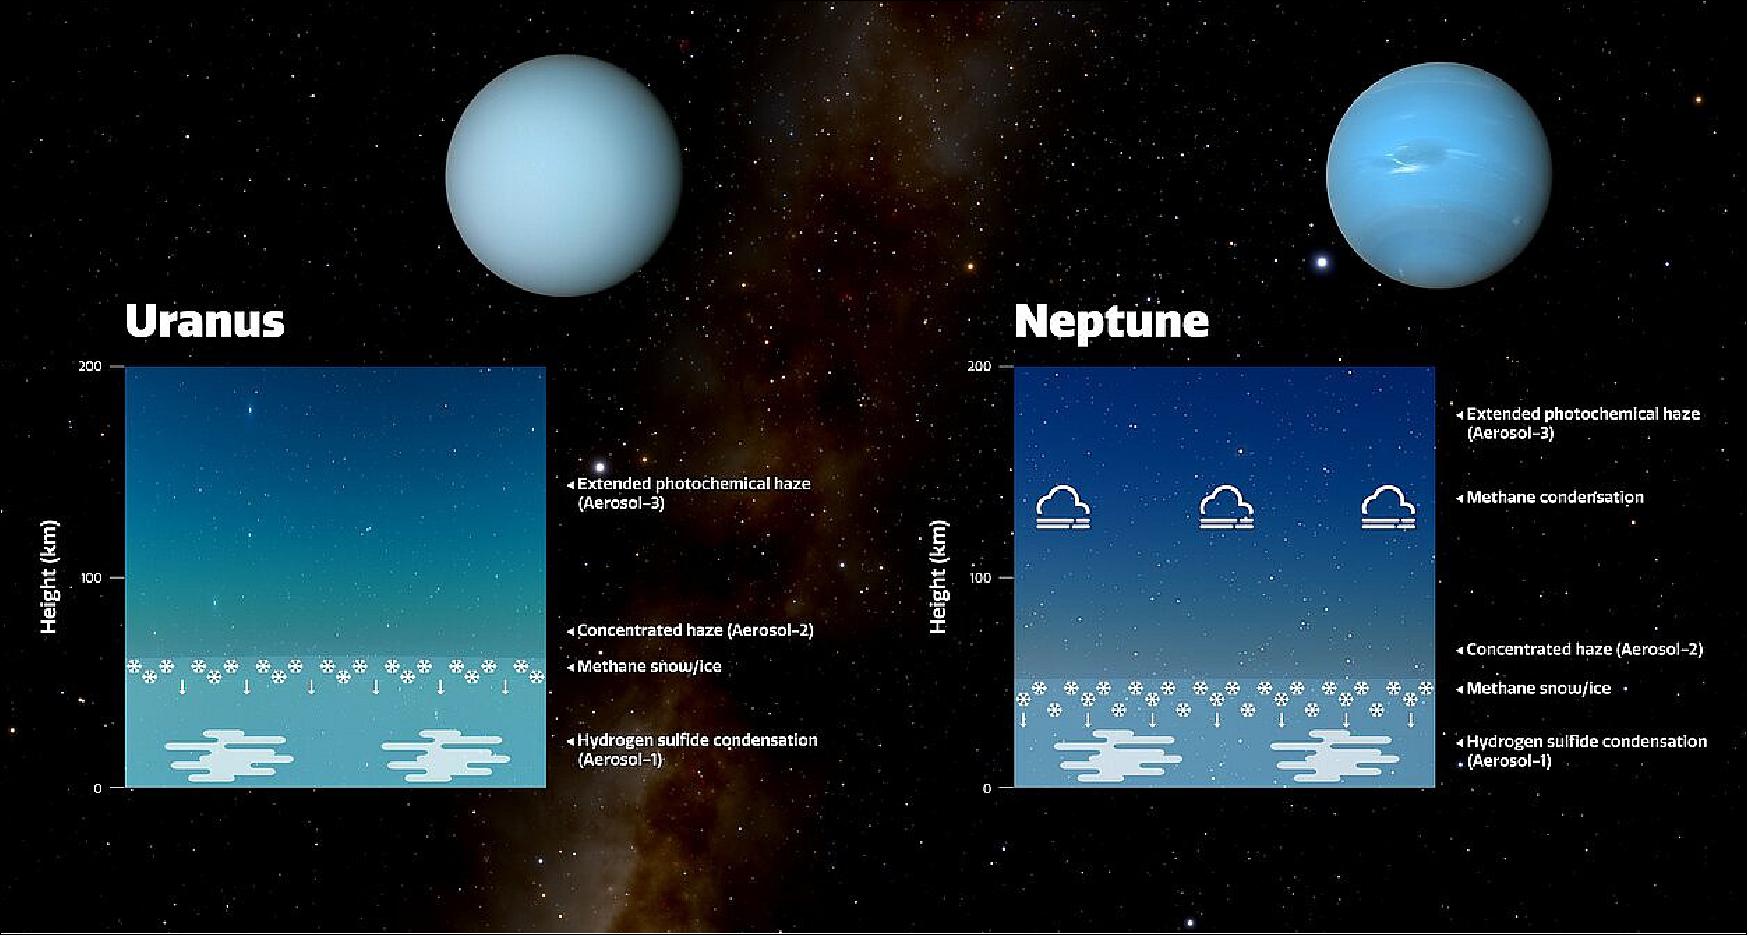 Figure 27: This diagram shows three layers of aerosols in the atmospheres of Uranus and Neptune, as modelled by a team of scientists. The height scale on the diagram represents the pressure above 10 bar. The deepest layer (the Aerosol-1 layer) is thick and composed of a mixture of hydrogen sulphide ice and particles produced by the interaction of the planets’ atmospheres with sunlight. - The key layer that affects the colours is the middle layer, which is a layer of haze particles (referred to in the paper as the Aerosol-2 layer) that is thicker on Uranus than on Neptune. The team suspects that, on both planets, methane ice condenses onto the particles in this layer, pulling the particles deeper into the atmosphere in a shower of methane snow. Because Neptune has a more active, turbulent atmosphere than Uranus does, the team believes Neptune’s atmosphere is more efficient at churning up methane particles into the haze layer and producing this snow. This removes more of the haze and keeps Neptune’s haze layer thinner than it is on Uranus, meaning the blue colour of Neptune looks stronger. - Above both of these layers is an extended layer of haze (the Aerosol-3 layer) similar to the layer below it but more tenuous. On Neptune, large methane ice particles also form above this layer (image credit: International Gemini Observatory/NOIRLab/NSF/AURA, J. da Silva / NASA /JPL-Caltech /B. Jónsson)